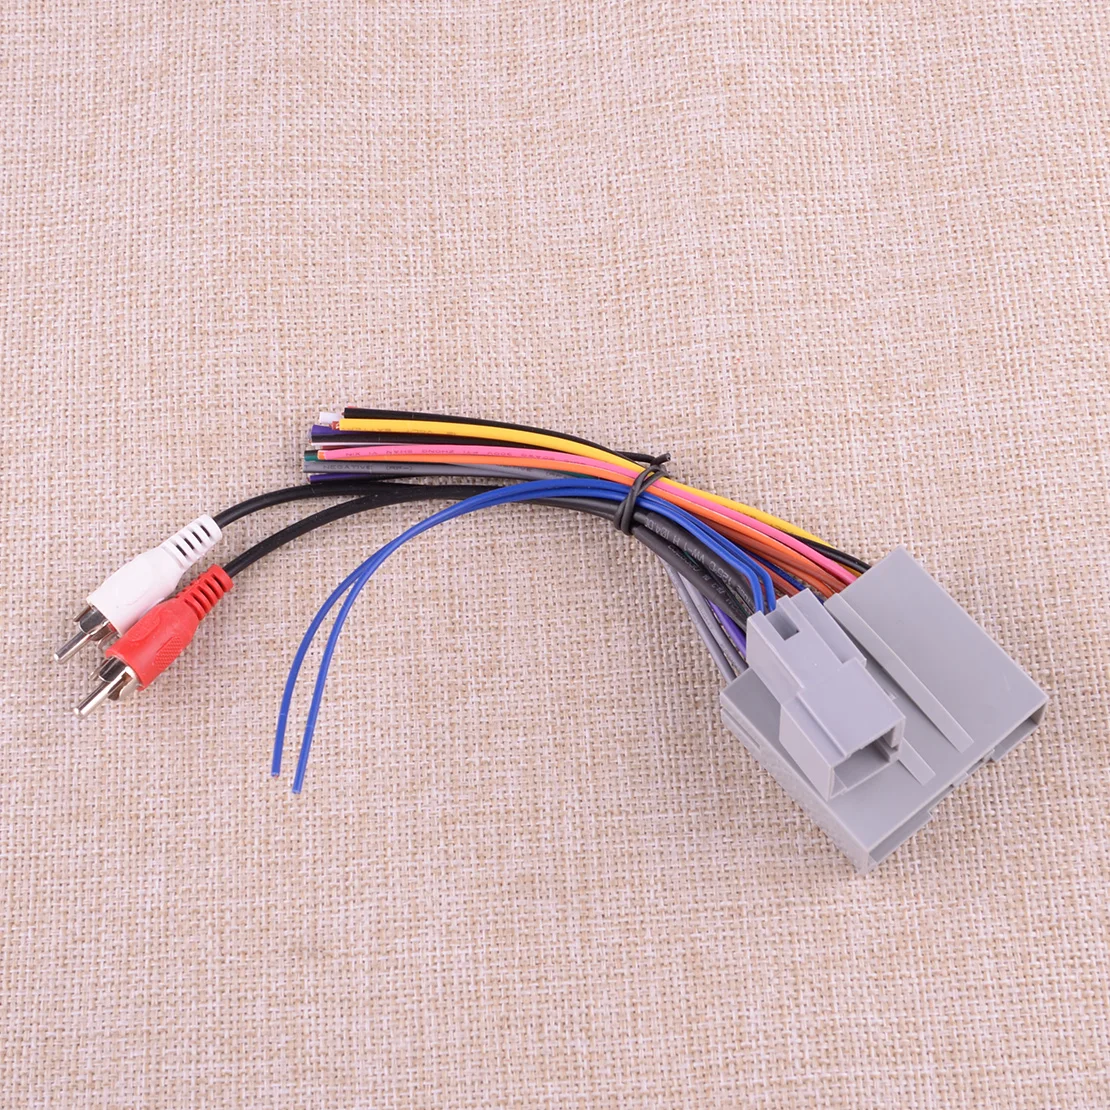 

Car Stereo Radio Wiring Harness Adapter Plug Fit for Ford Escape Focus Explorer F150 F250 Freestar Freestyle Mustang Taurus X